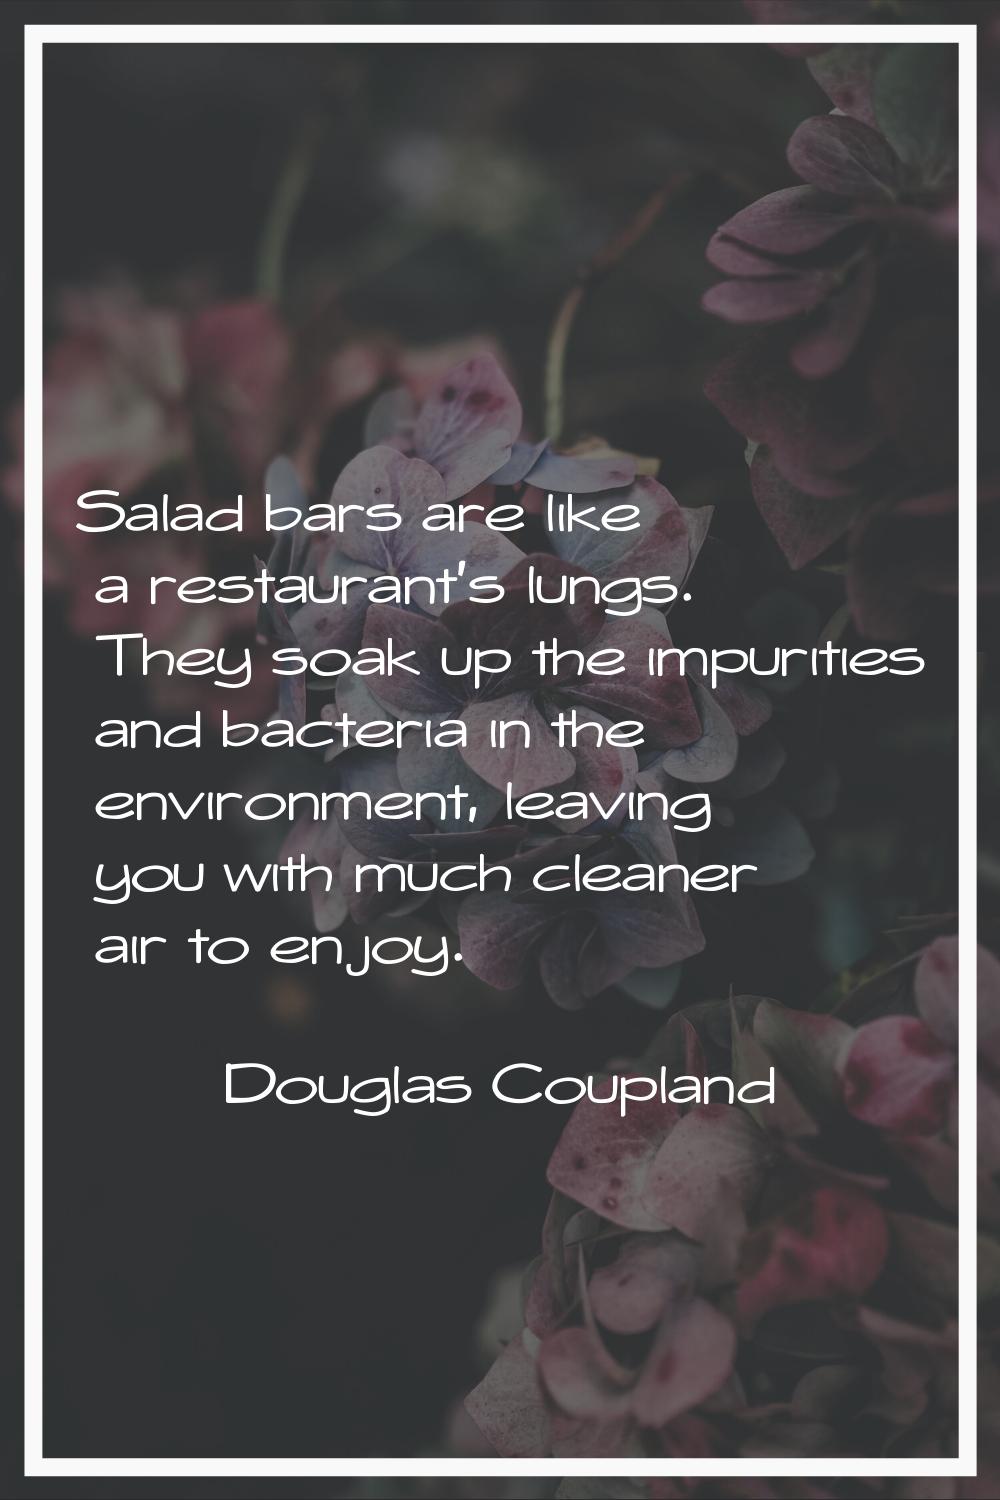 Salad bars are like a restaurant's lungs. They soak up the impurities and bacteria in the environme